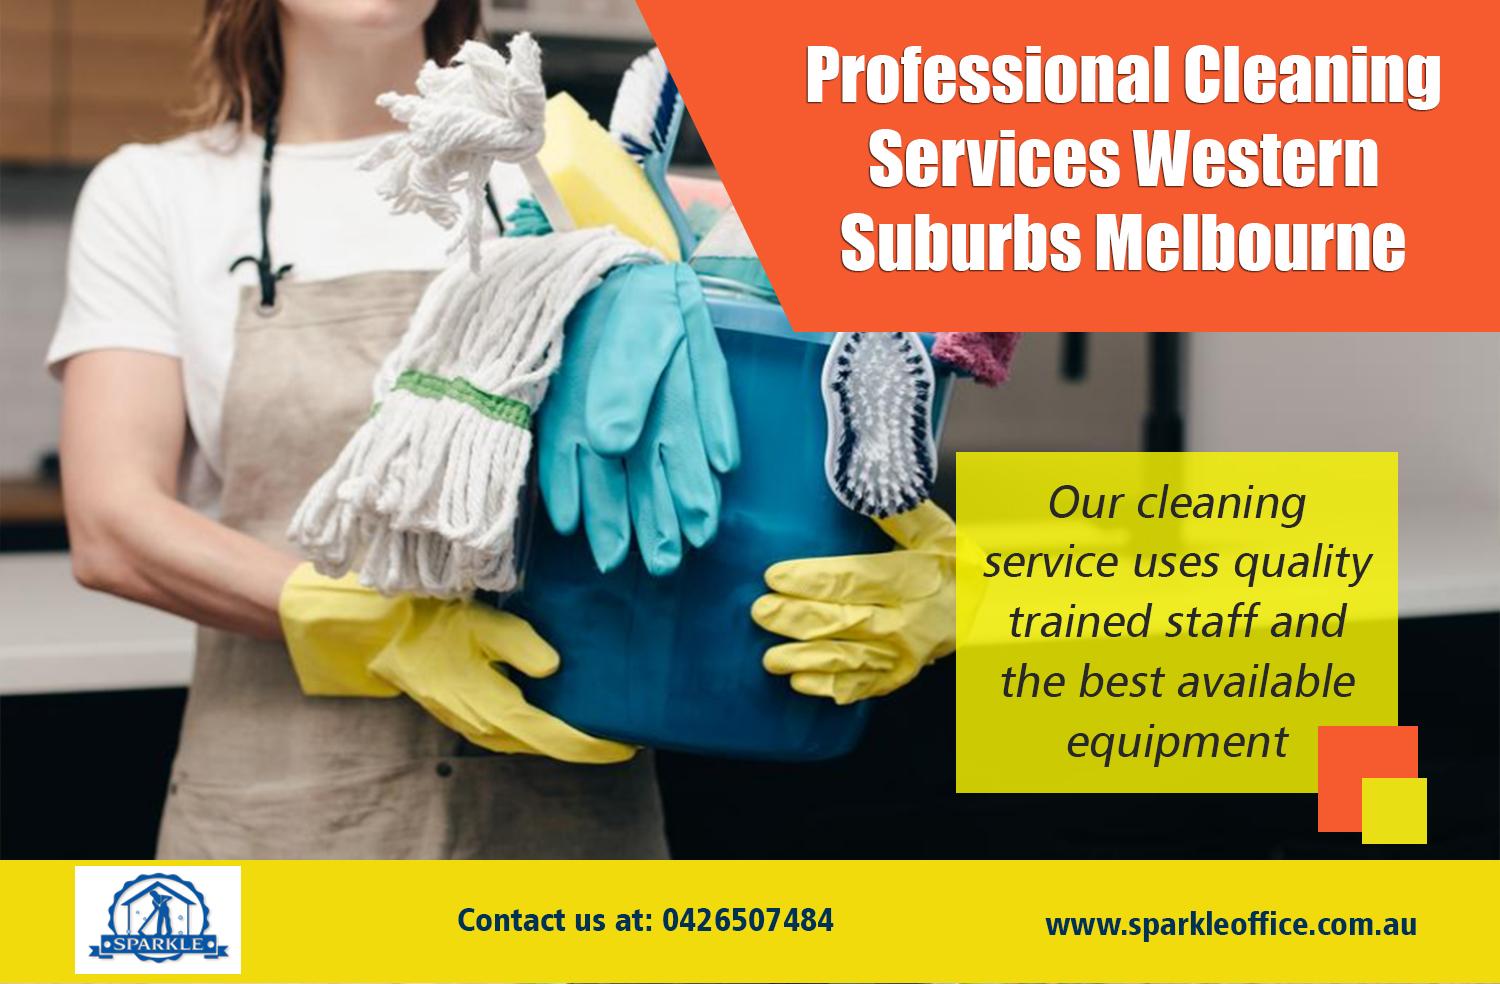 Professional Cleaning Services western suburbs Melbourne